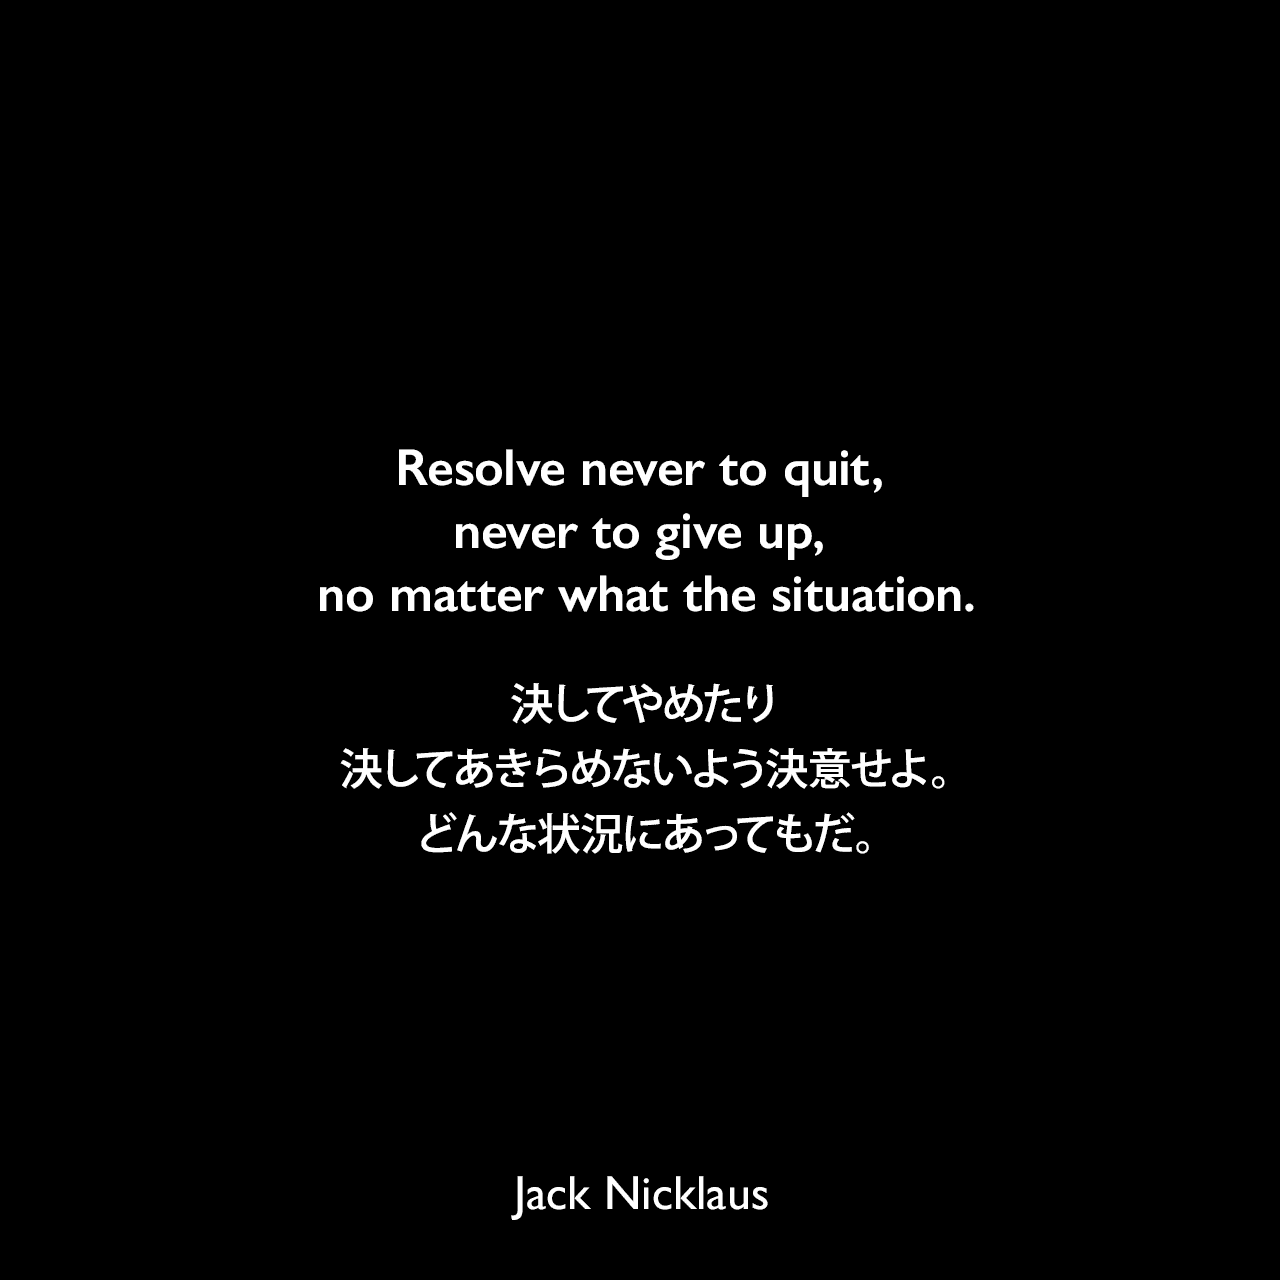 Resolve never to quit, never to give up, no matter what the situation.決してやめたり、決してあきらめないよう決意せよ。どんな状況にあってもだ。